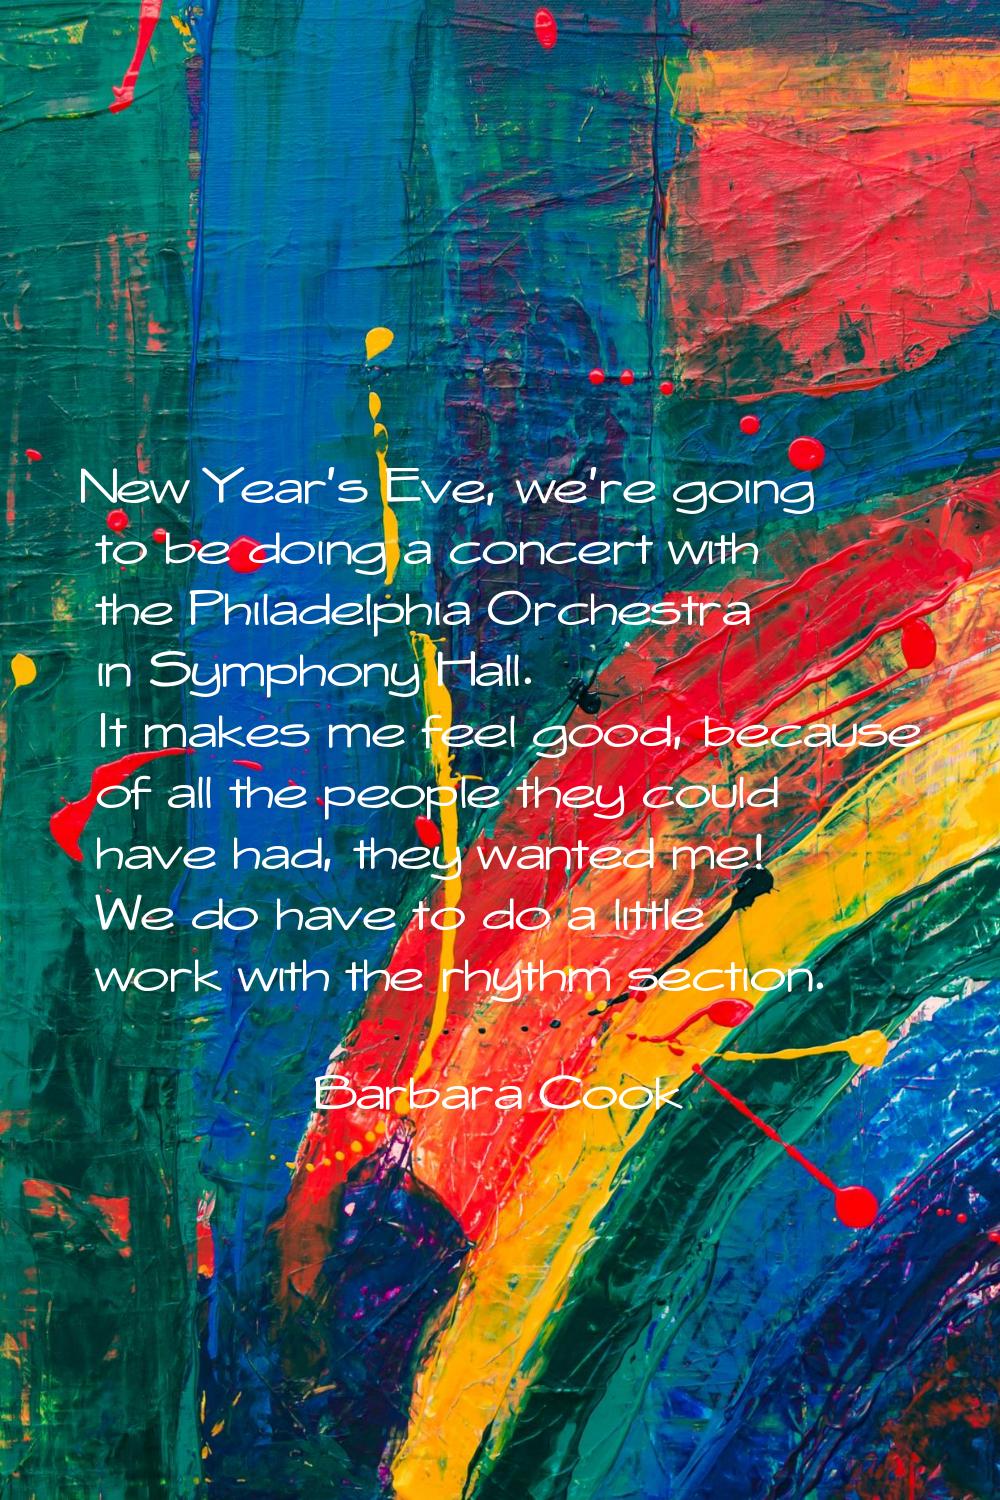 New Year's Eve, we're going to be doing a concert with the Philadelphia Orchestra in Symphony Hall.